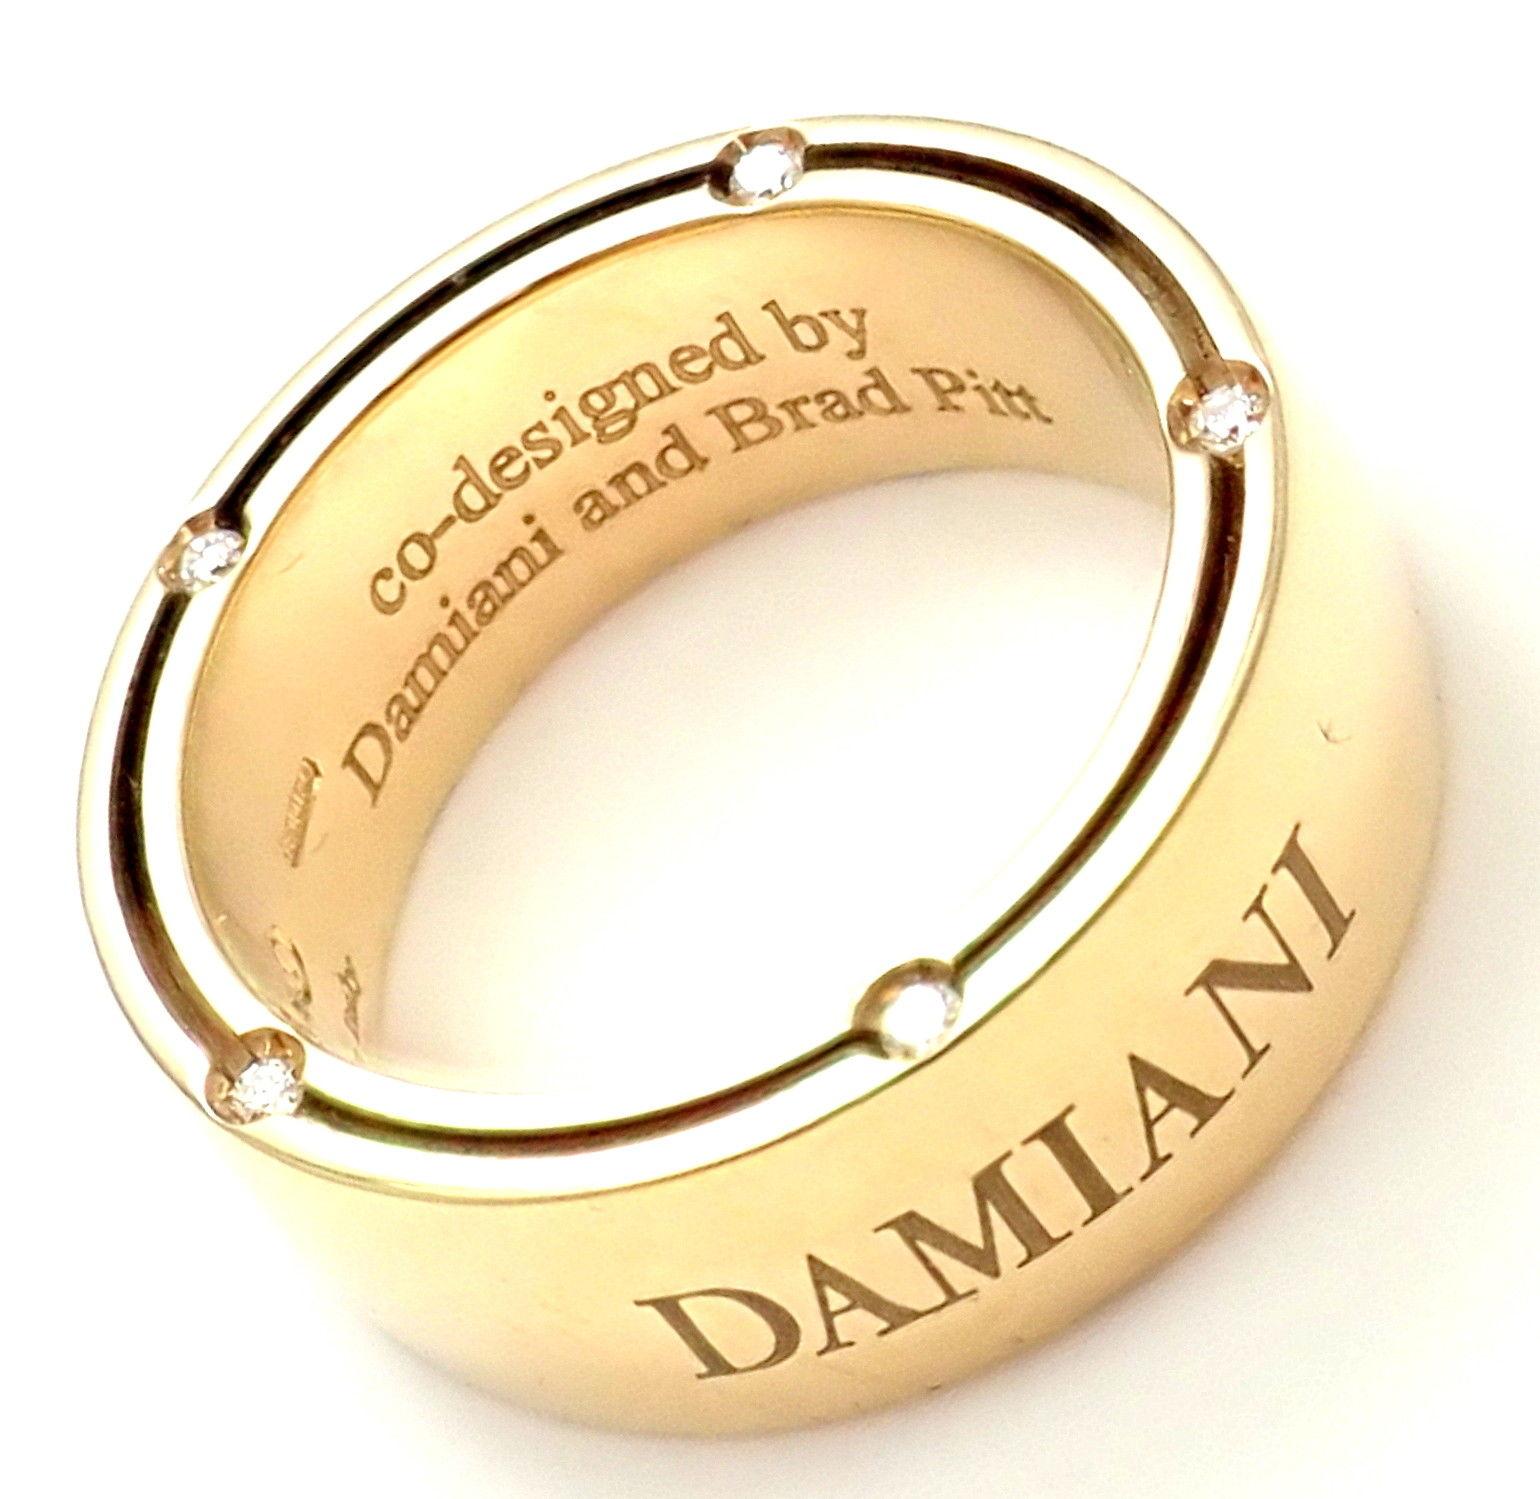 18k Yellow Gold Diamond Band Ring by Damiani And Brad Pitt.
With 5 round brilliant cut diamonds total weight approx .10ct VS1 clarity, G color.
Retail Price: $3,590
This ring comes with Damiani Box + Paperwork.
Details:
Size: 5.5
Weight: 10.7